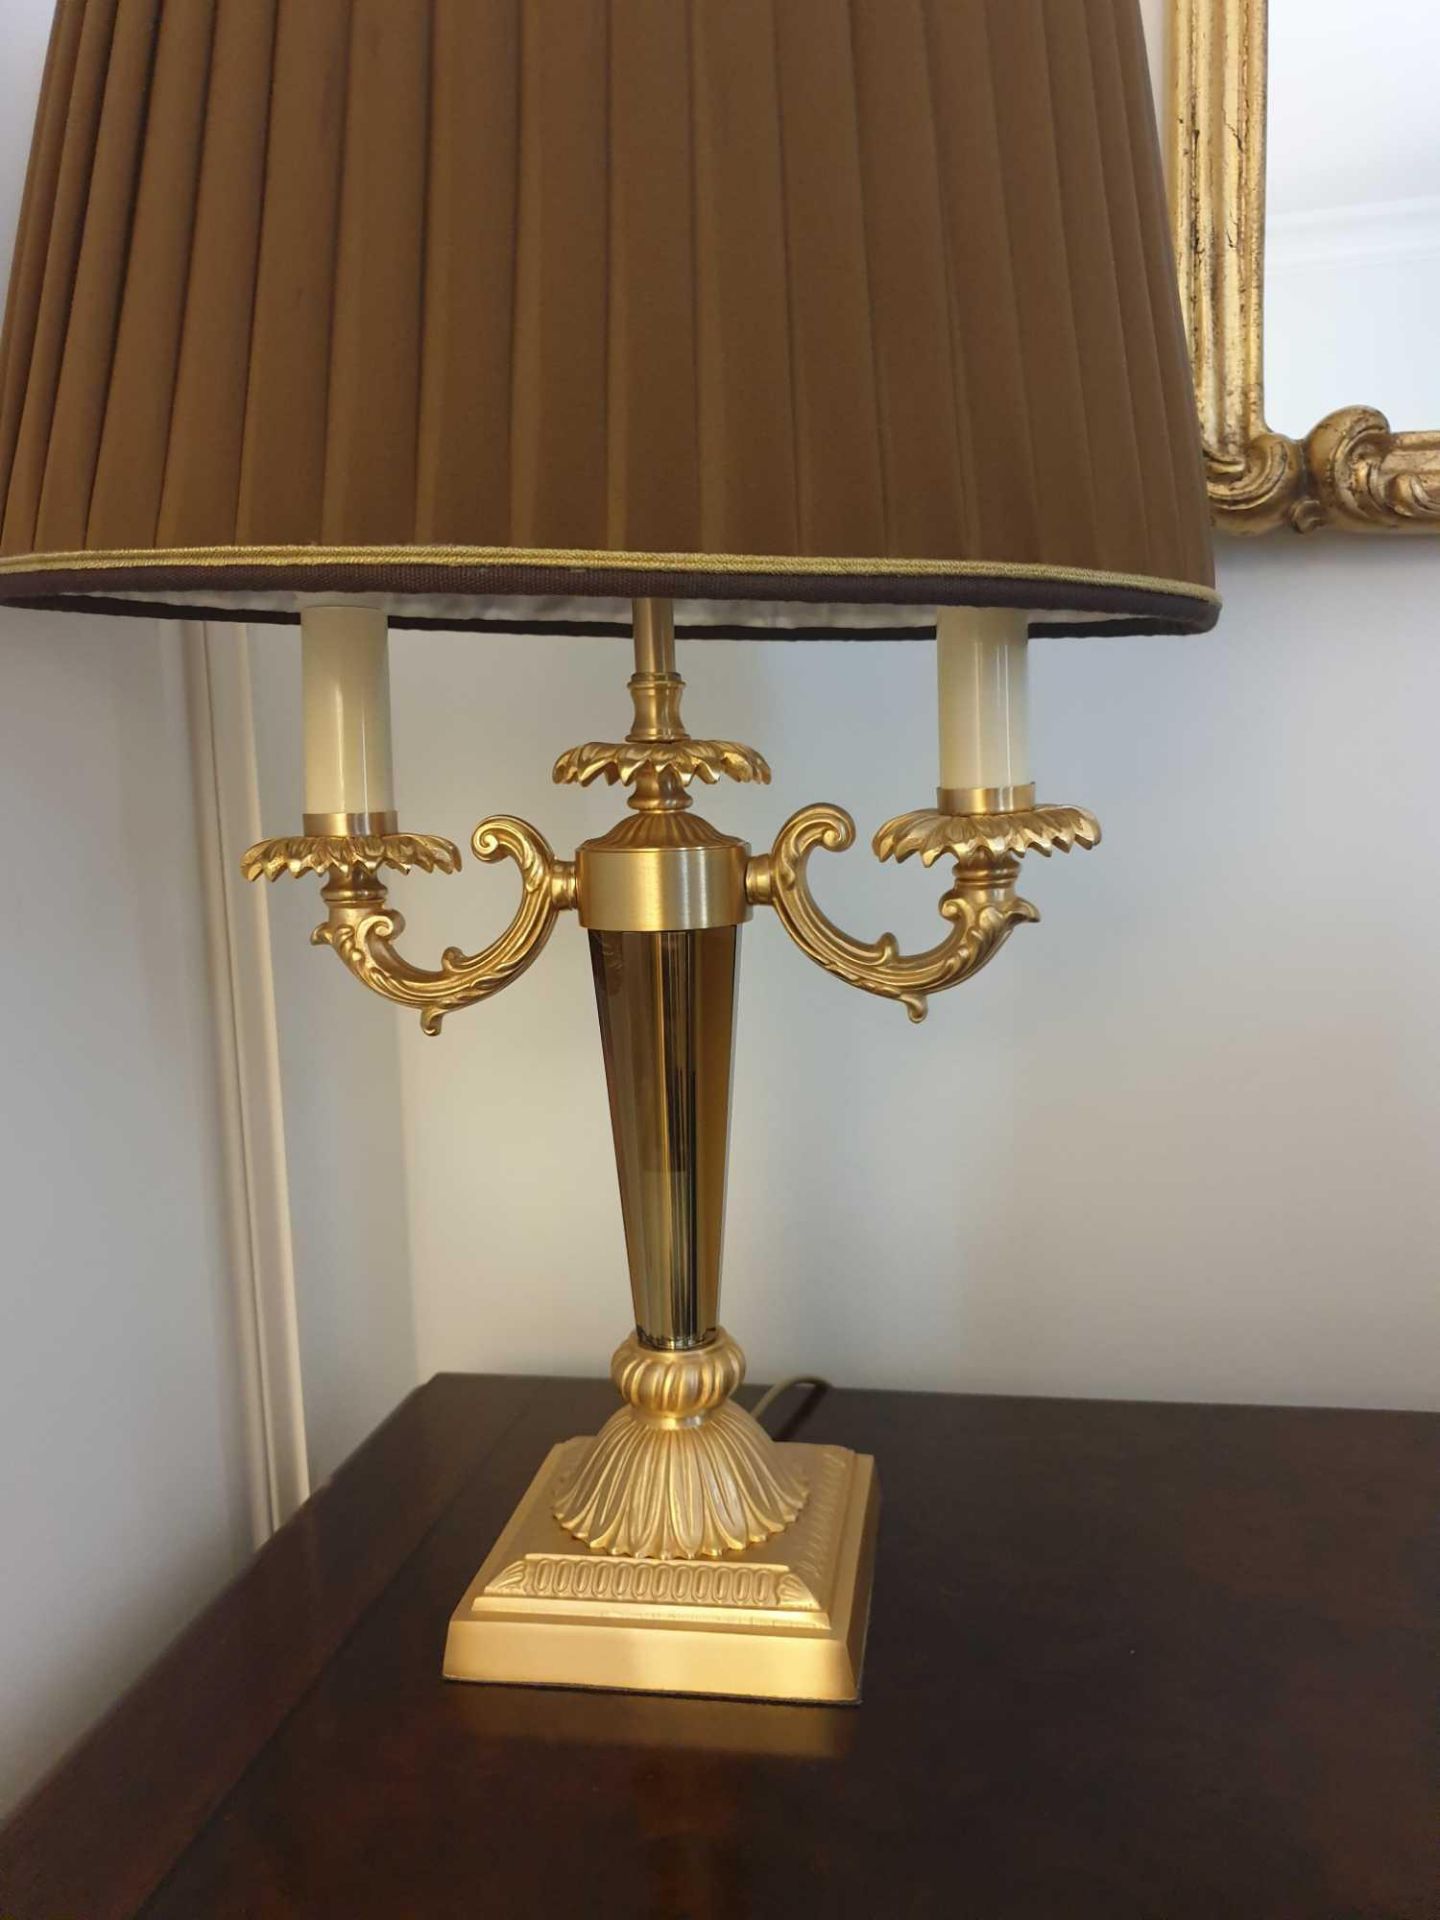 Laudarte Aretusa Twin Arm Table Lamp Bronze Lost-Wax Casting Antique Gilt Bronze Base And Column And - Image 2 of 2